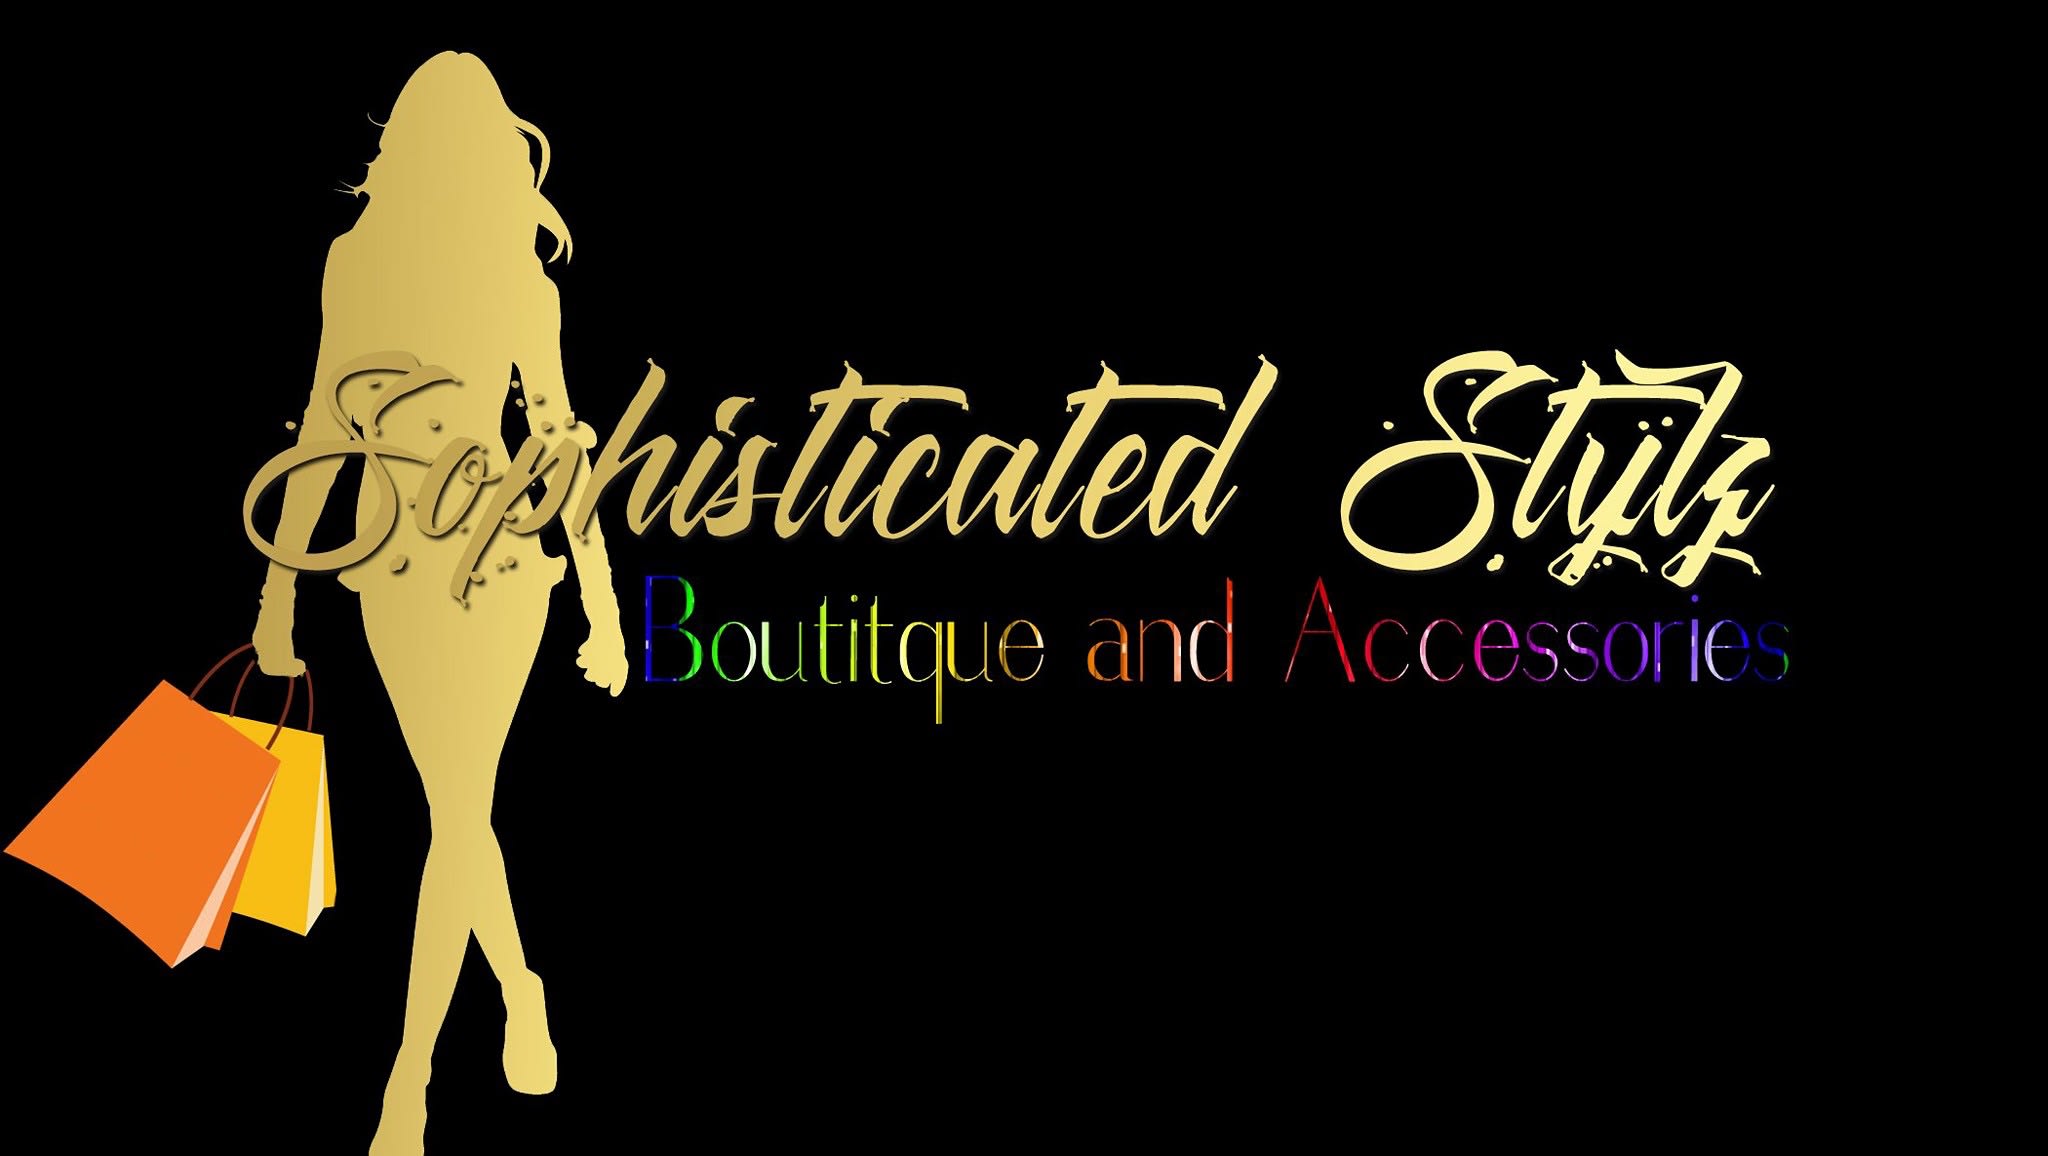 Sophisticated Stylz Boutique